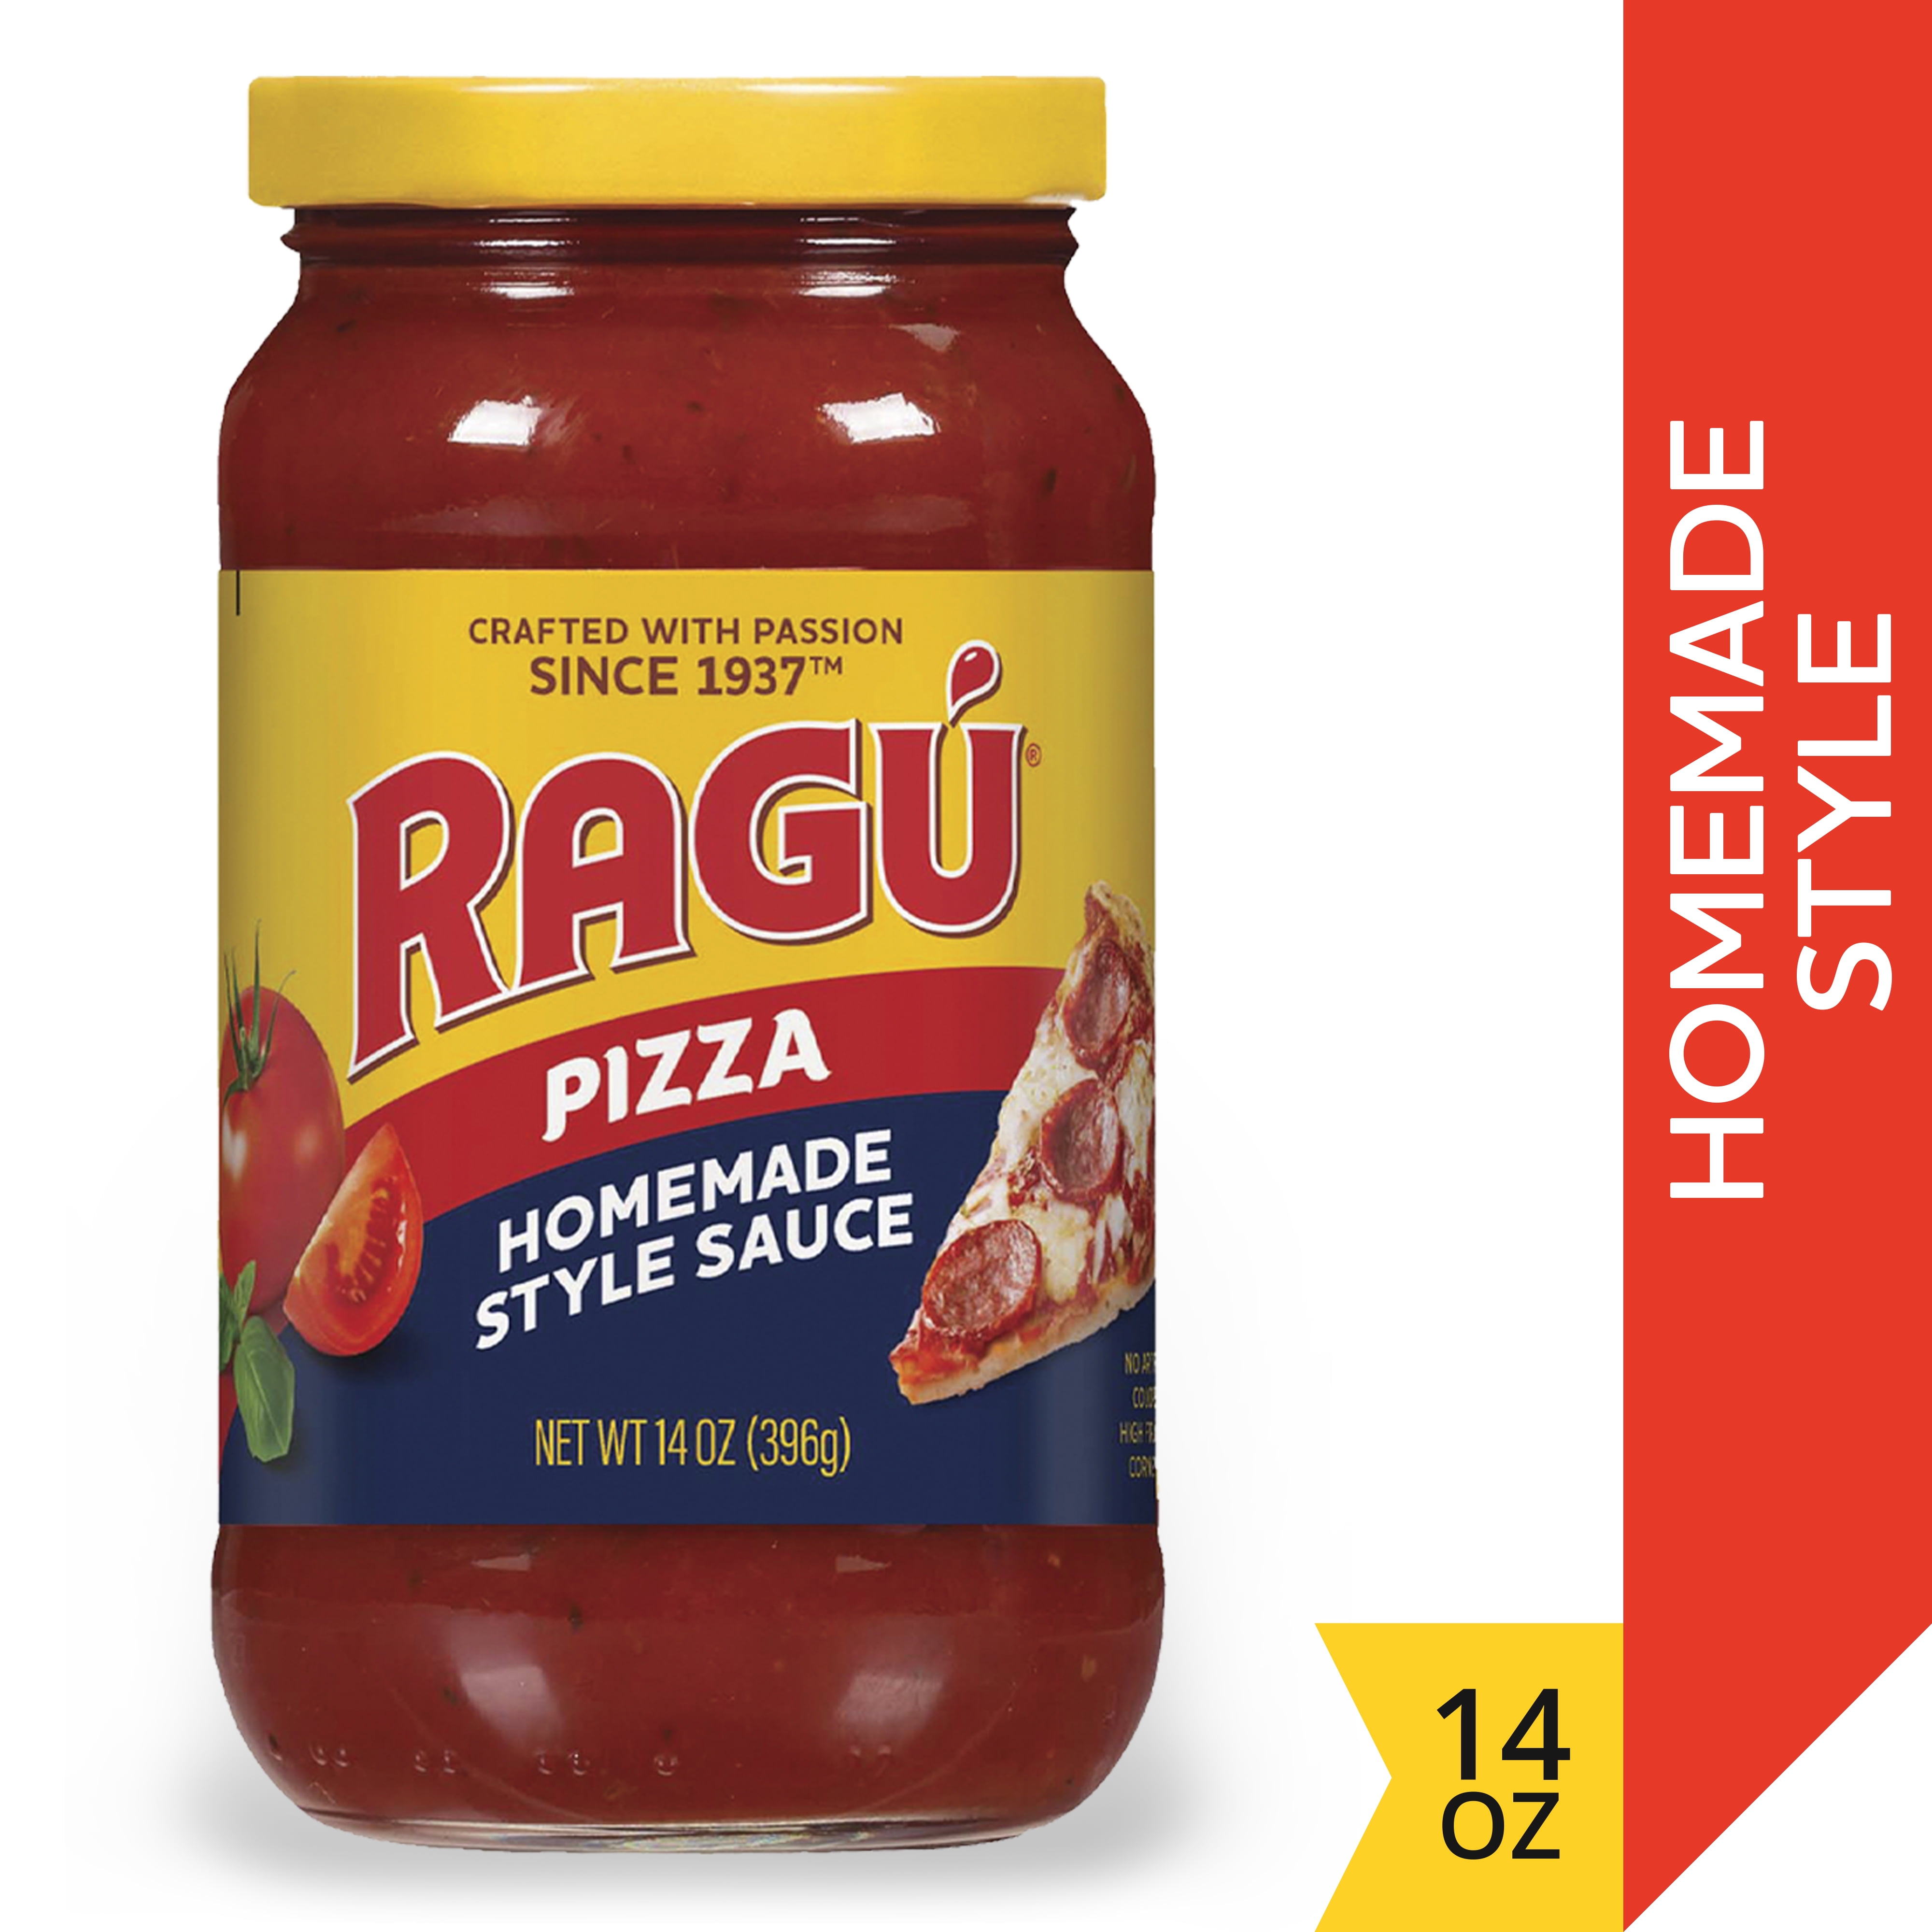 Ragu Homemade Style Pizza Sauce, Perfect for Quick and Easy Italian Pizza at Home, 14 OZ